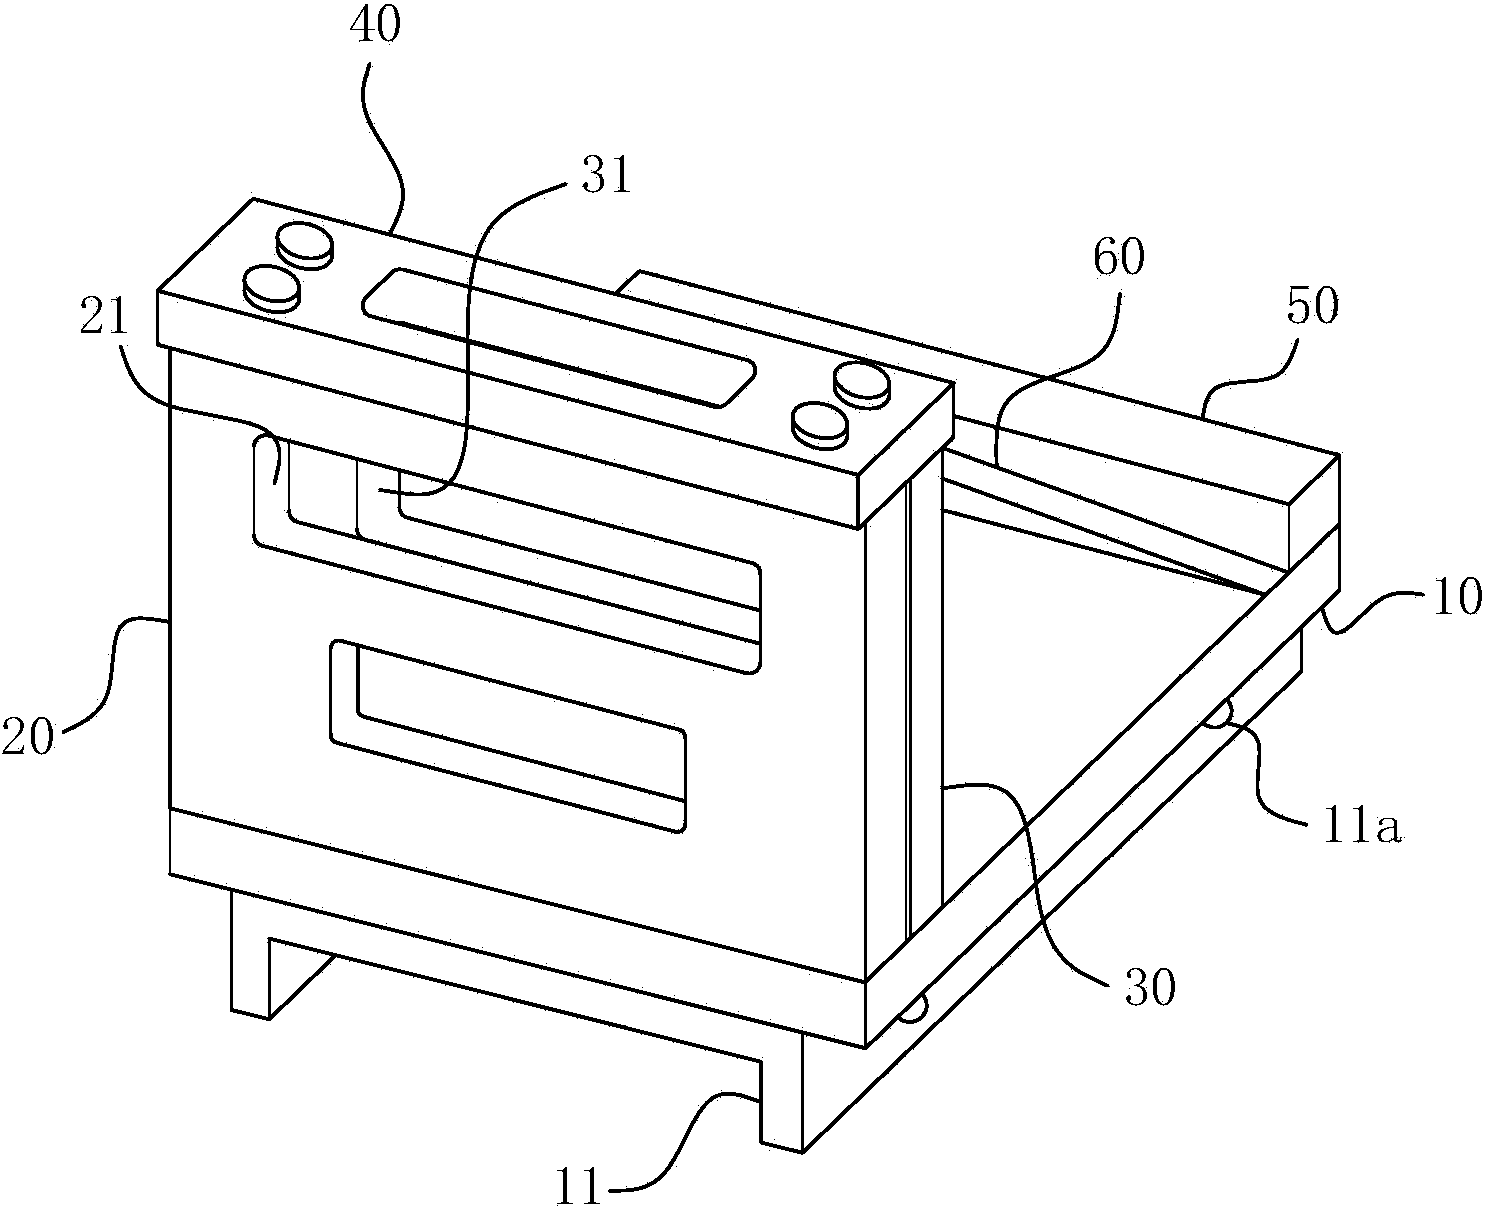 Three-point bending testing system based on dynamic fracture toughness of testing material